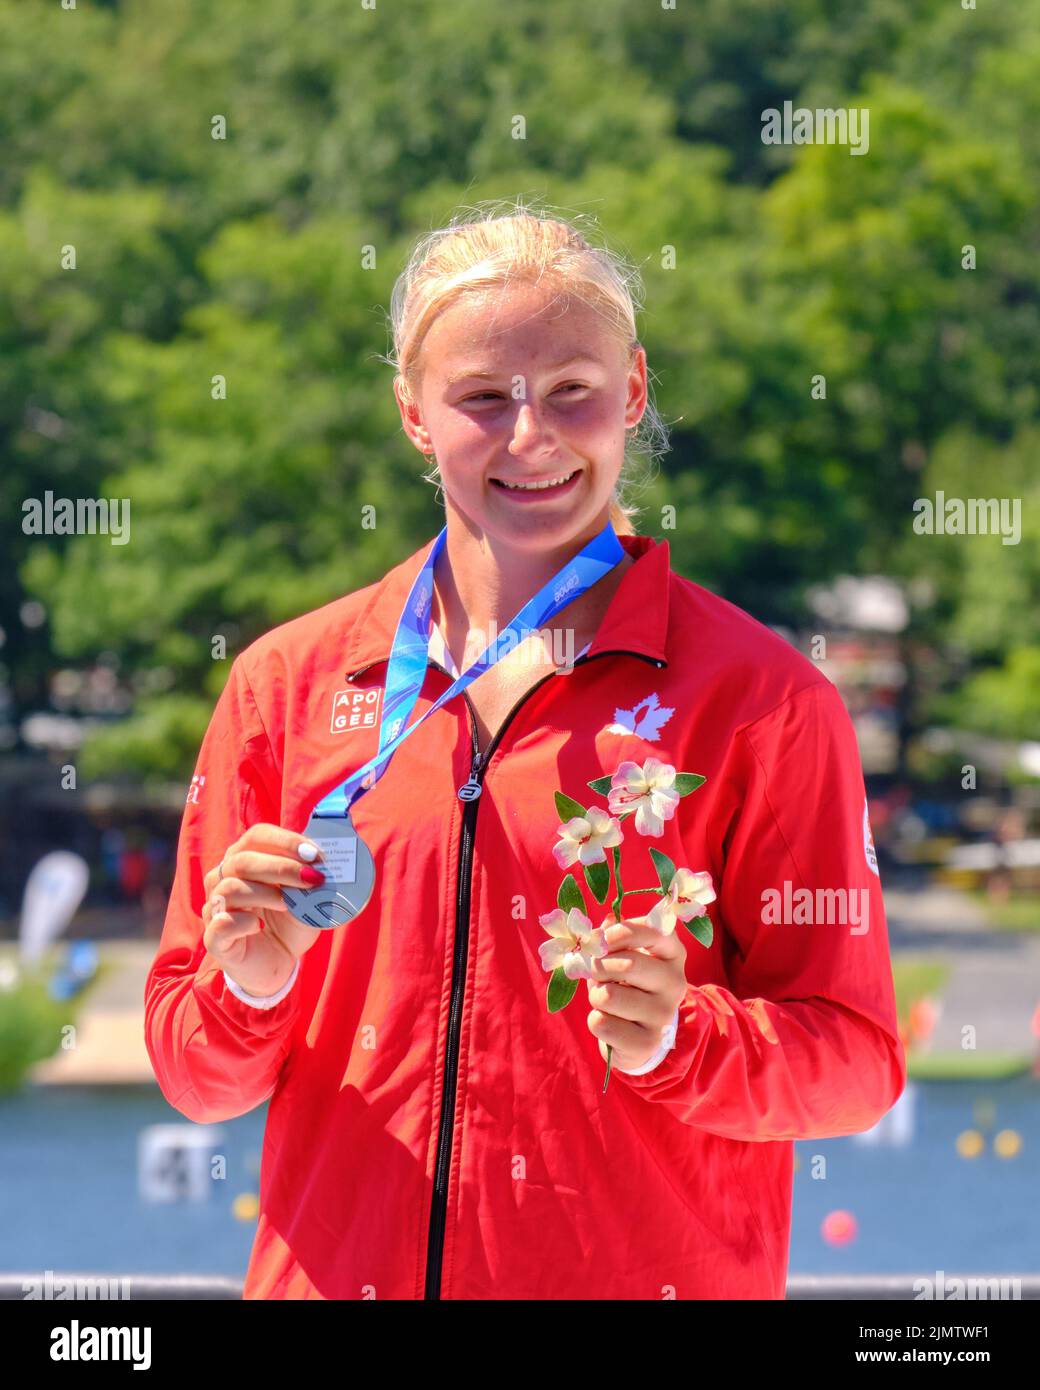 Dartmouth, Canada. August 7th, 2022. Canadian Sophia Jensen receives her silver medal in the C1 Women 500m World Championships race under the cheers of the home crowd. The 2022 ICF Canoe Sprint and Paracanoe World Championships takes place on Lake Banook in Dartmouth (Halifax). Credit: meanderingemu/Alamy Live News Stock Photo